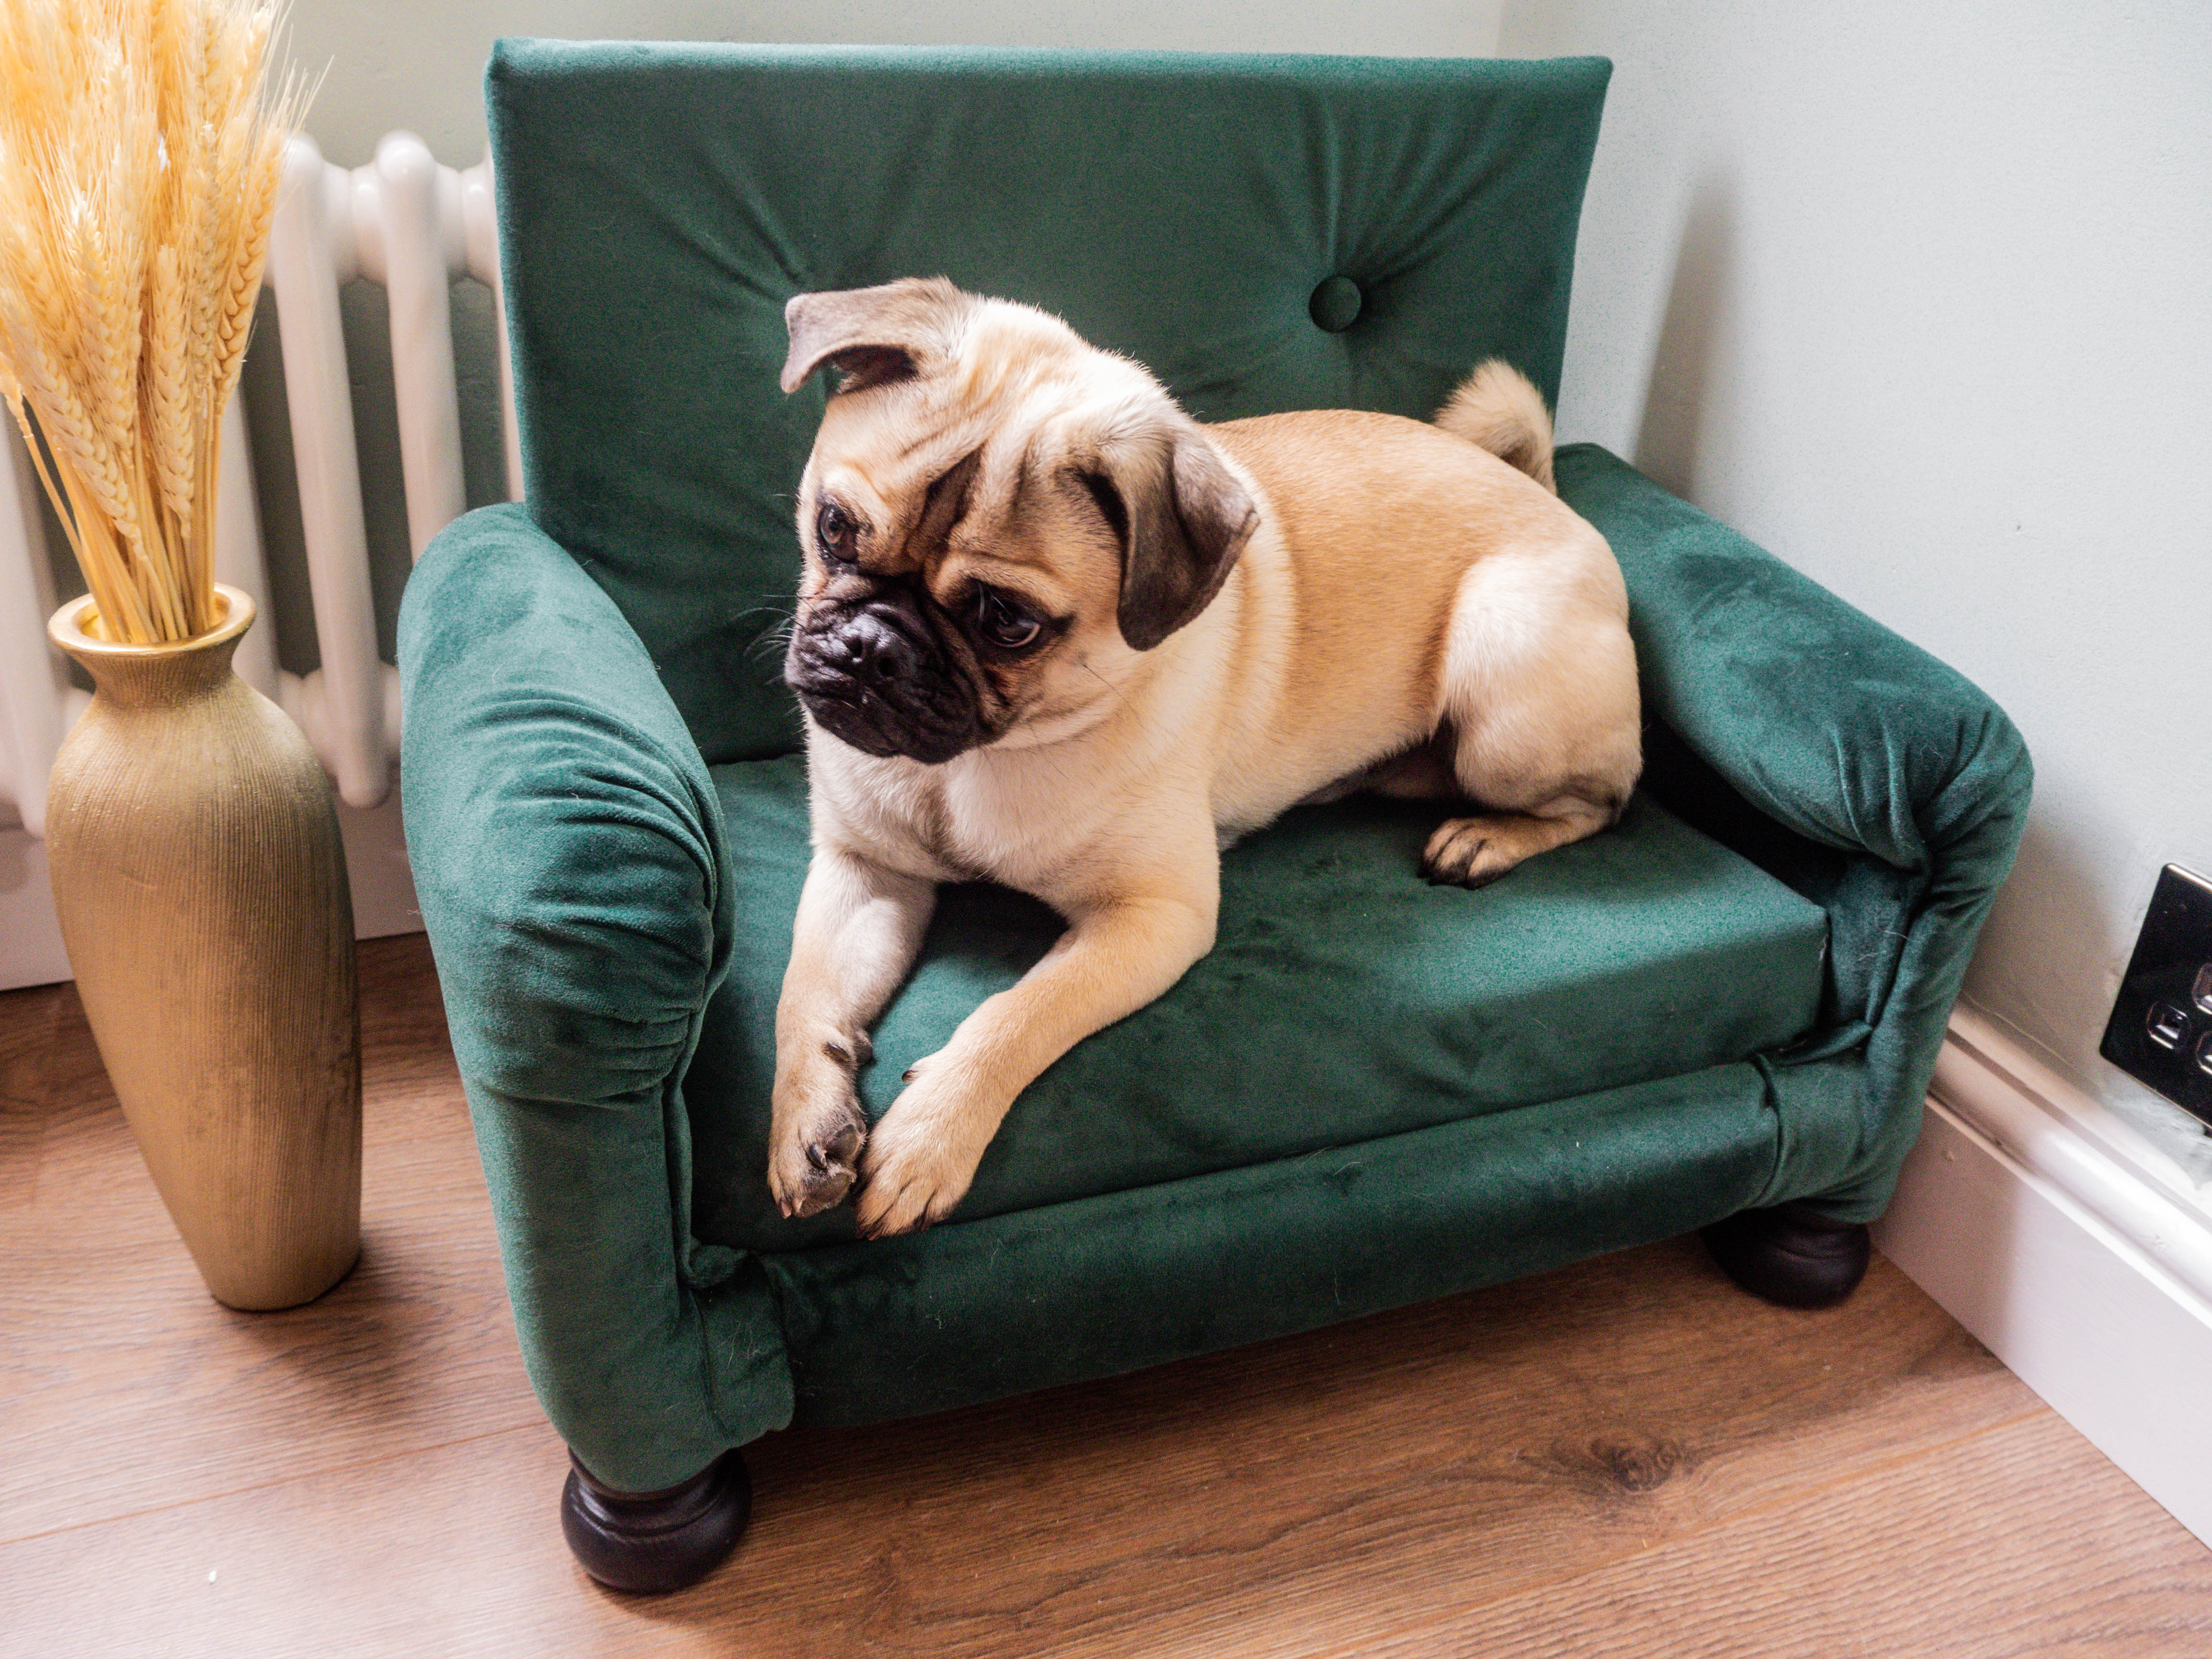 How To Build A Luxurious Dog Sofa Bed